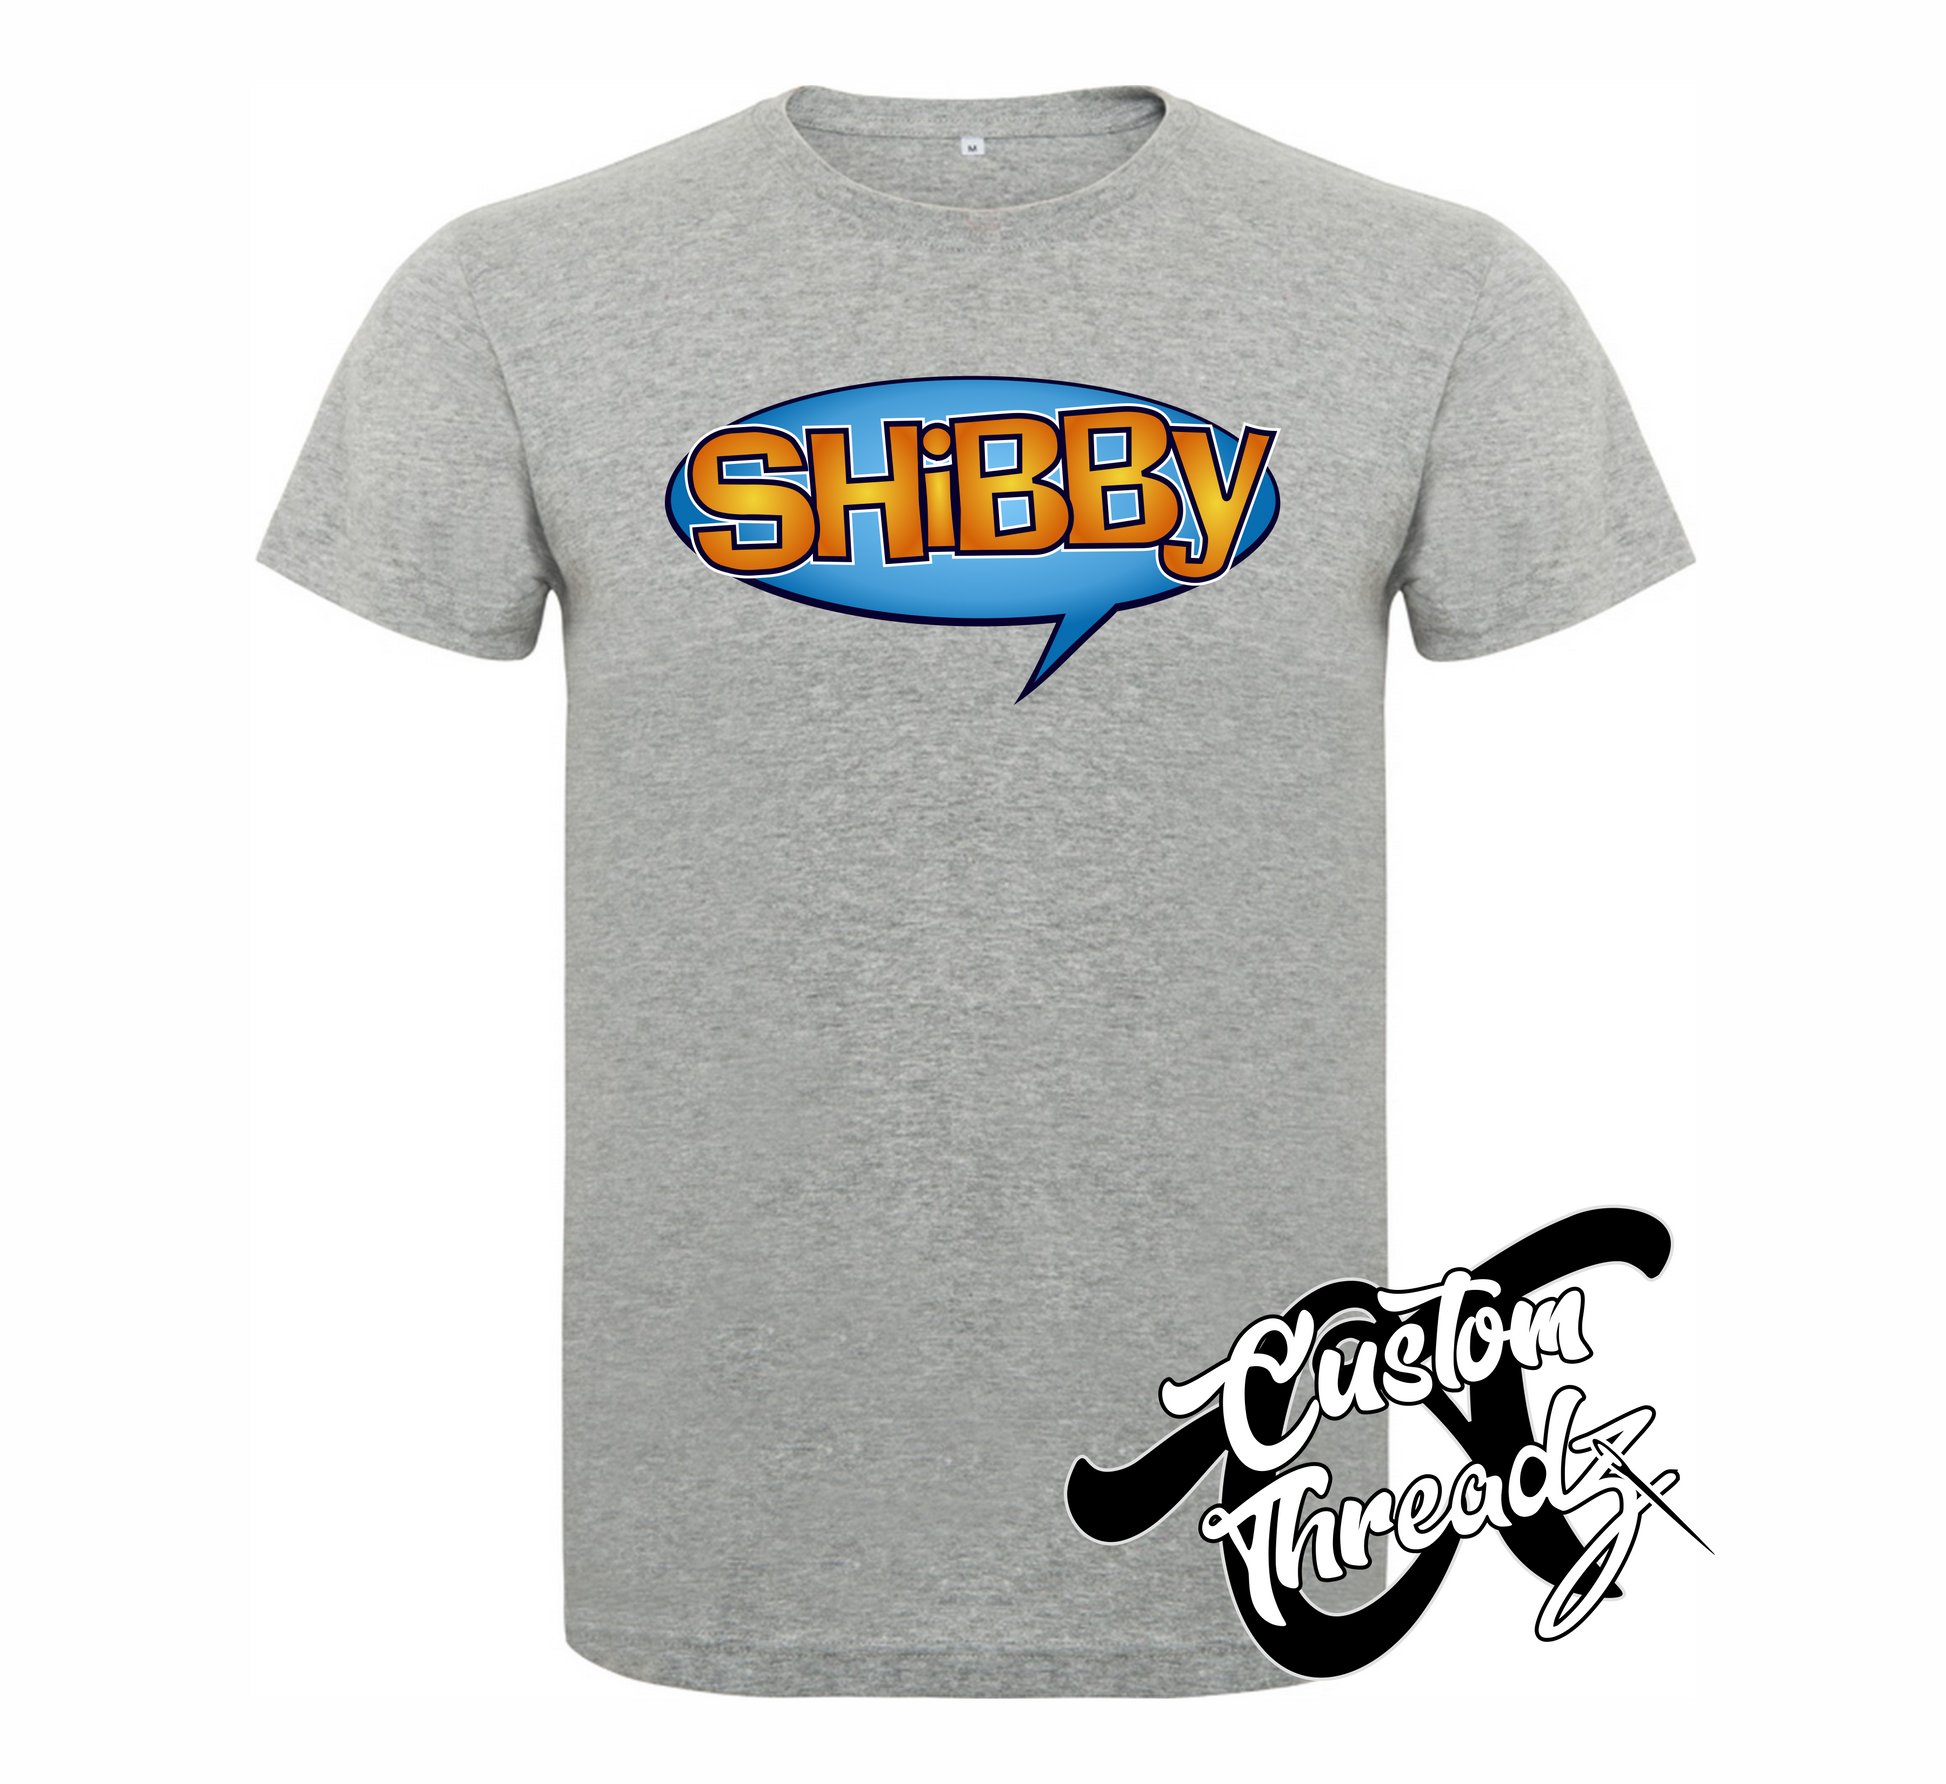 athletic heather grey tee with shibby dude wheres my car DTG printed design